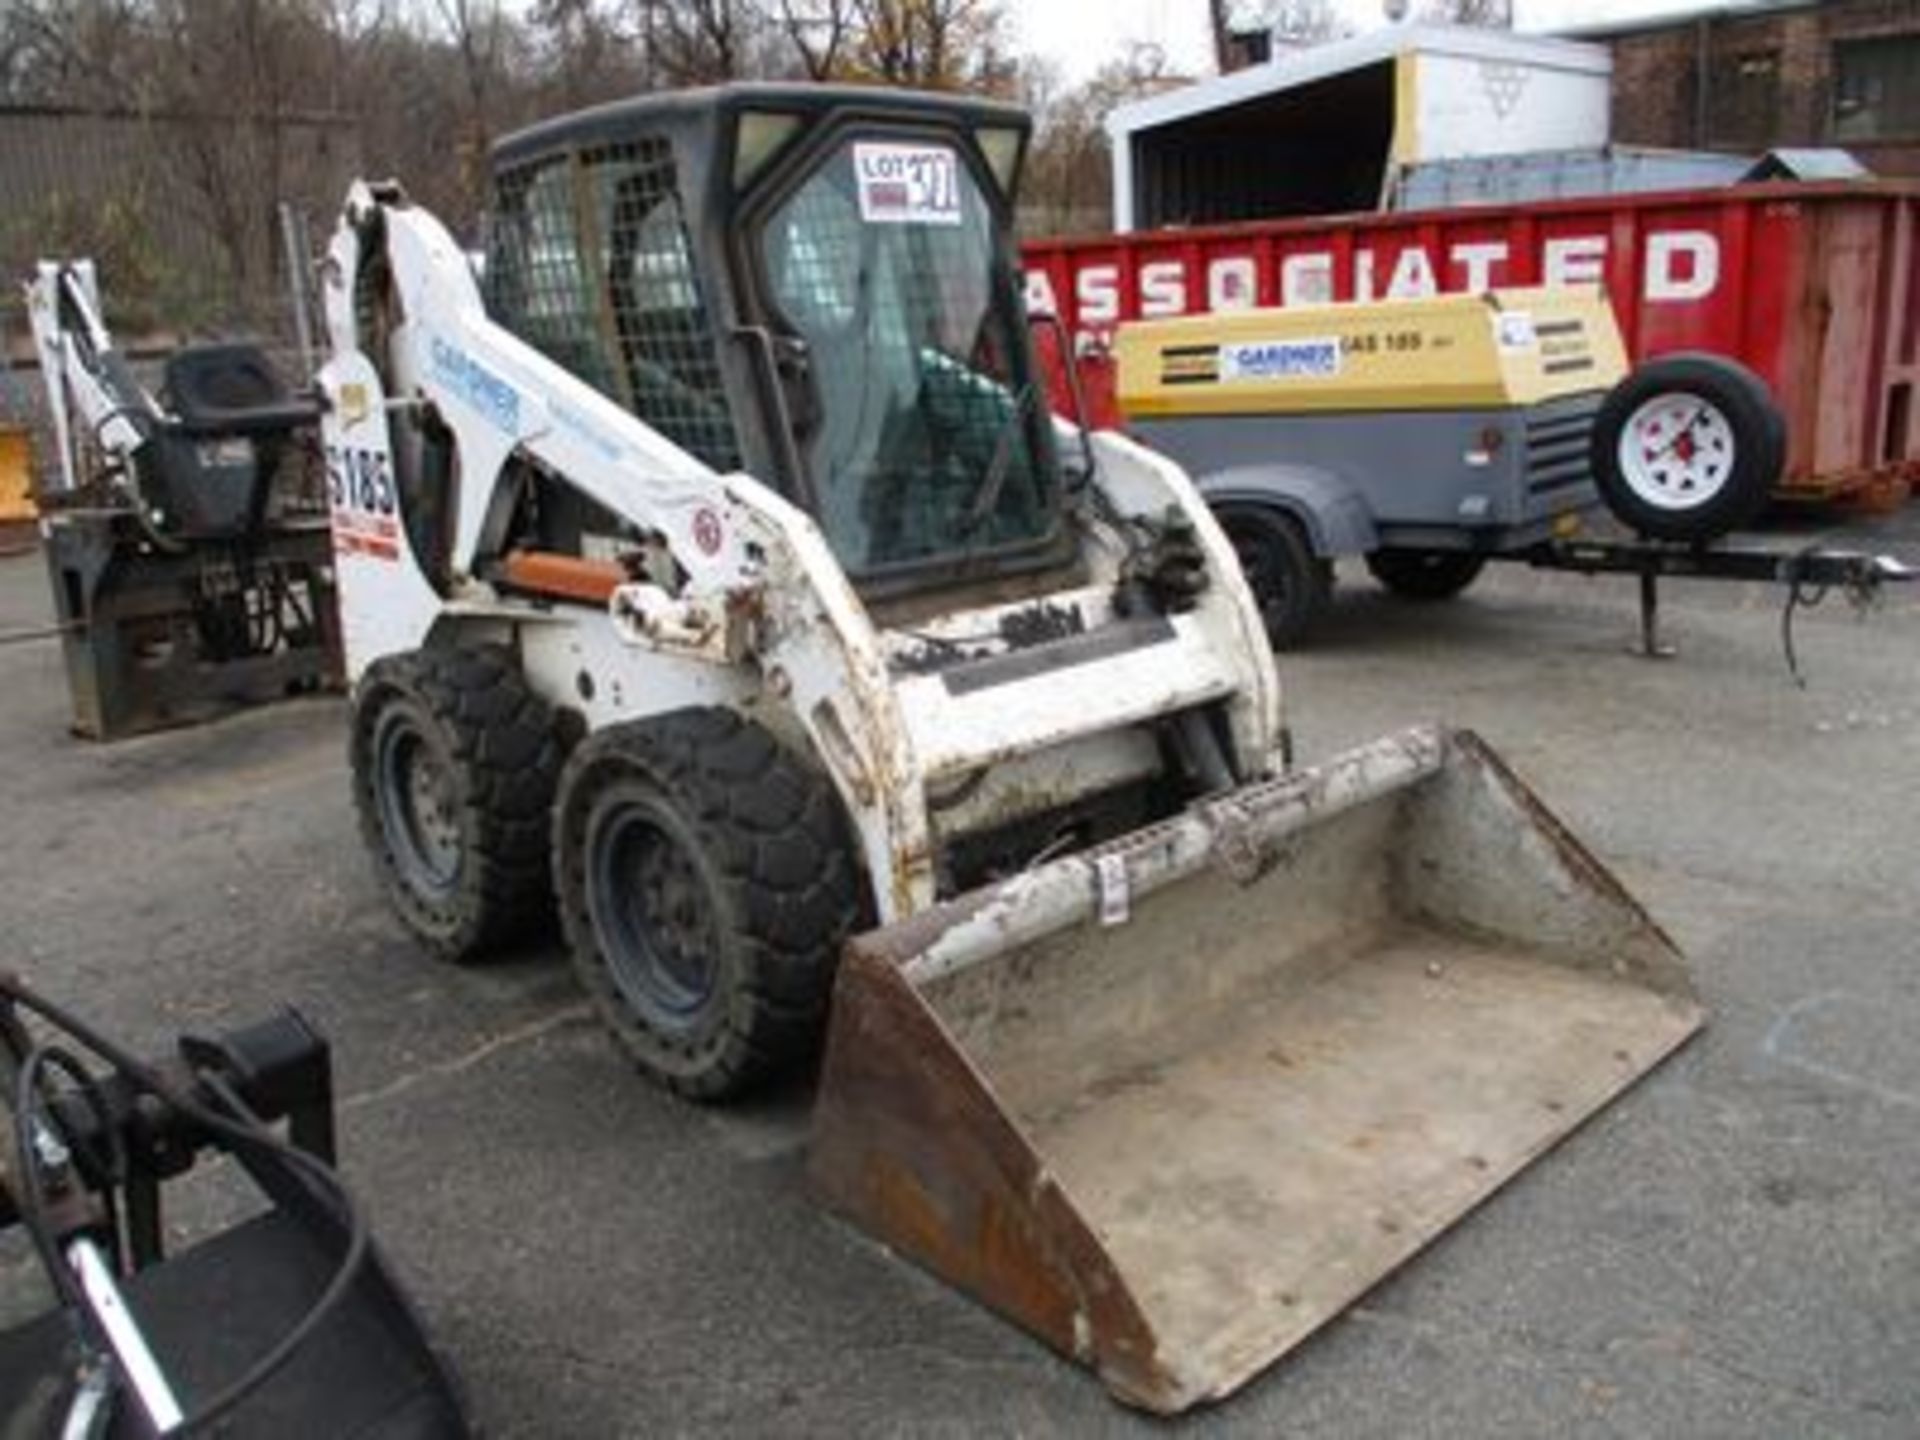 BOBCAT S185 TURBO COMPACT SKID STEER LOADER, ID#519031917, (4280 HRS.) - Image 2 of 2